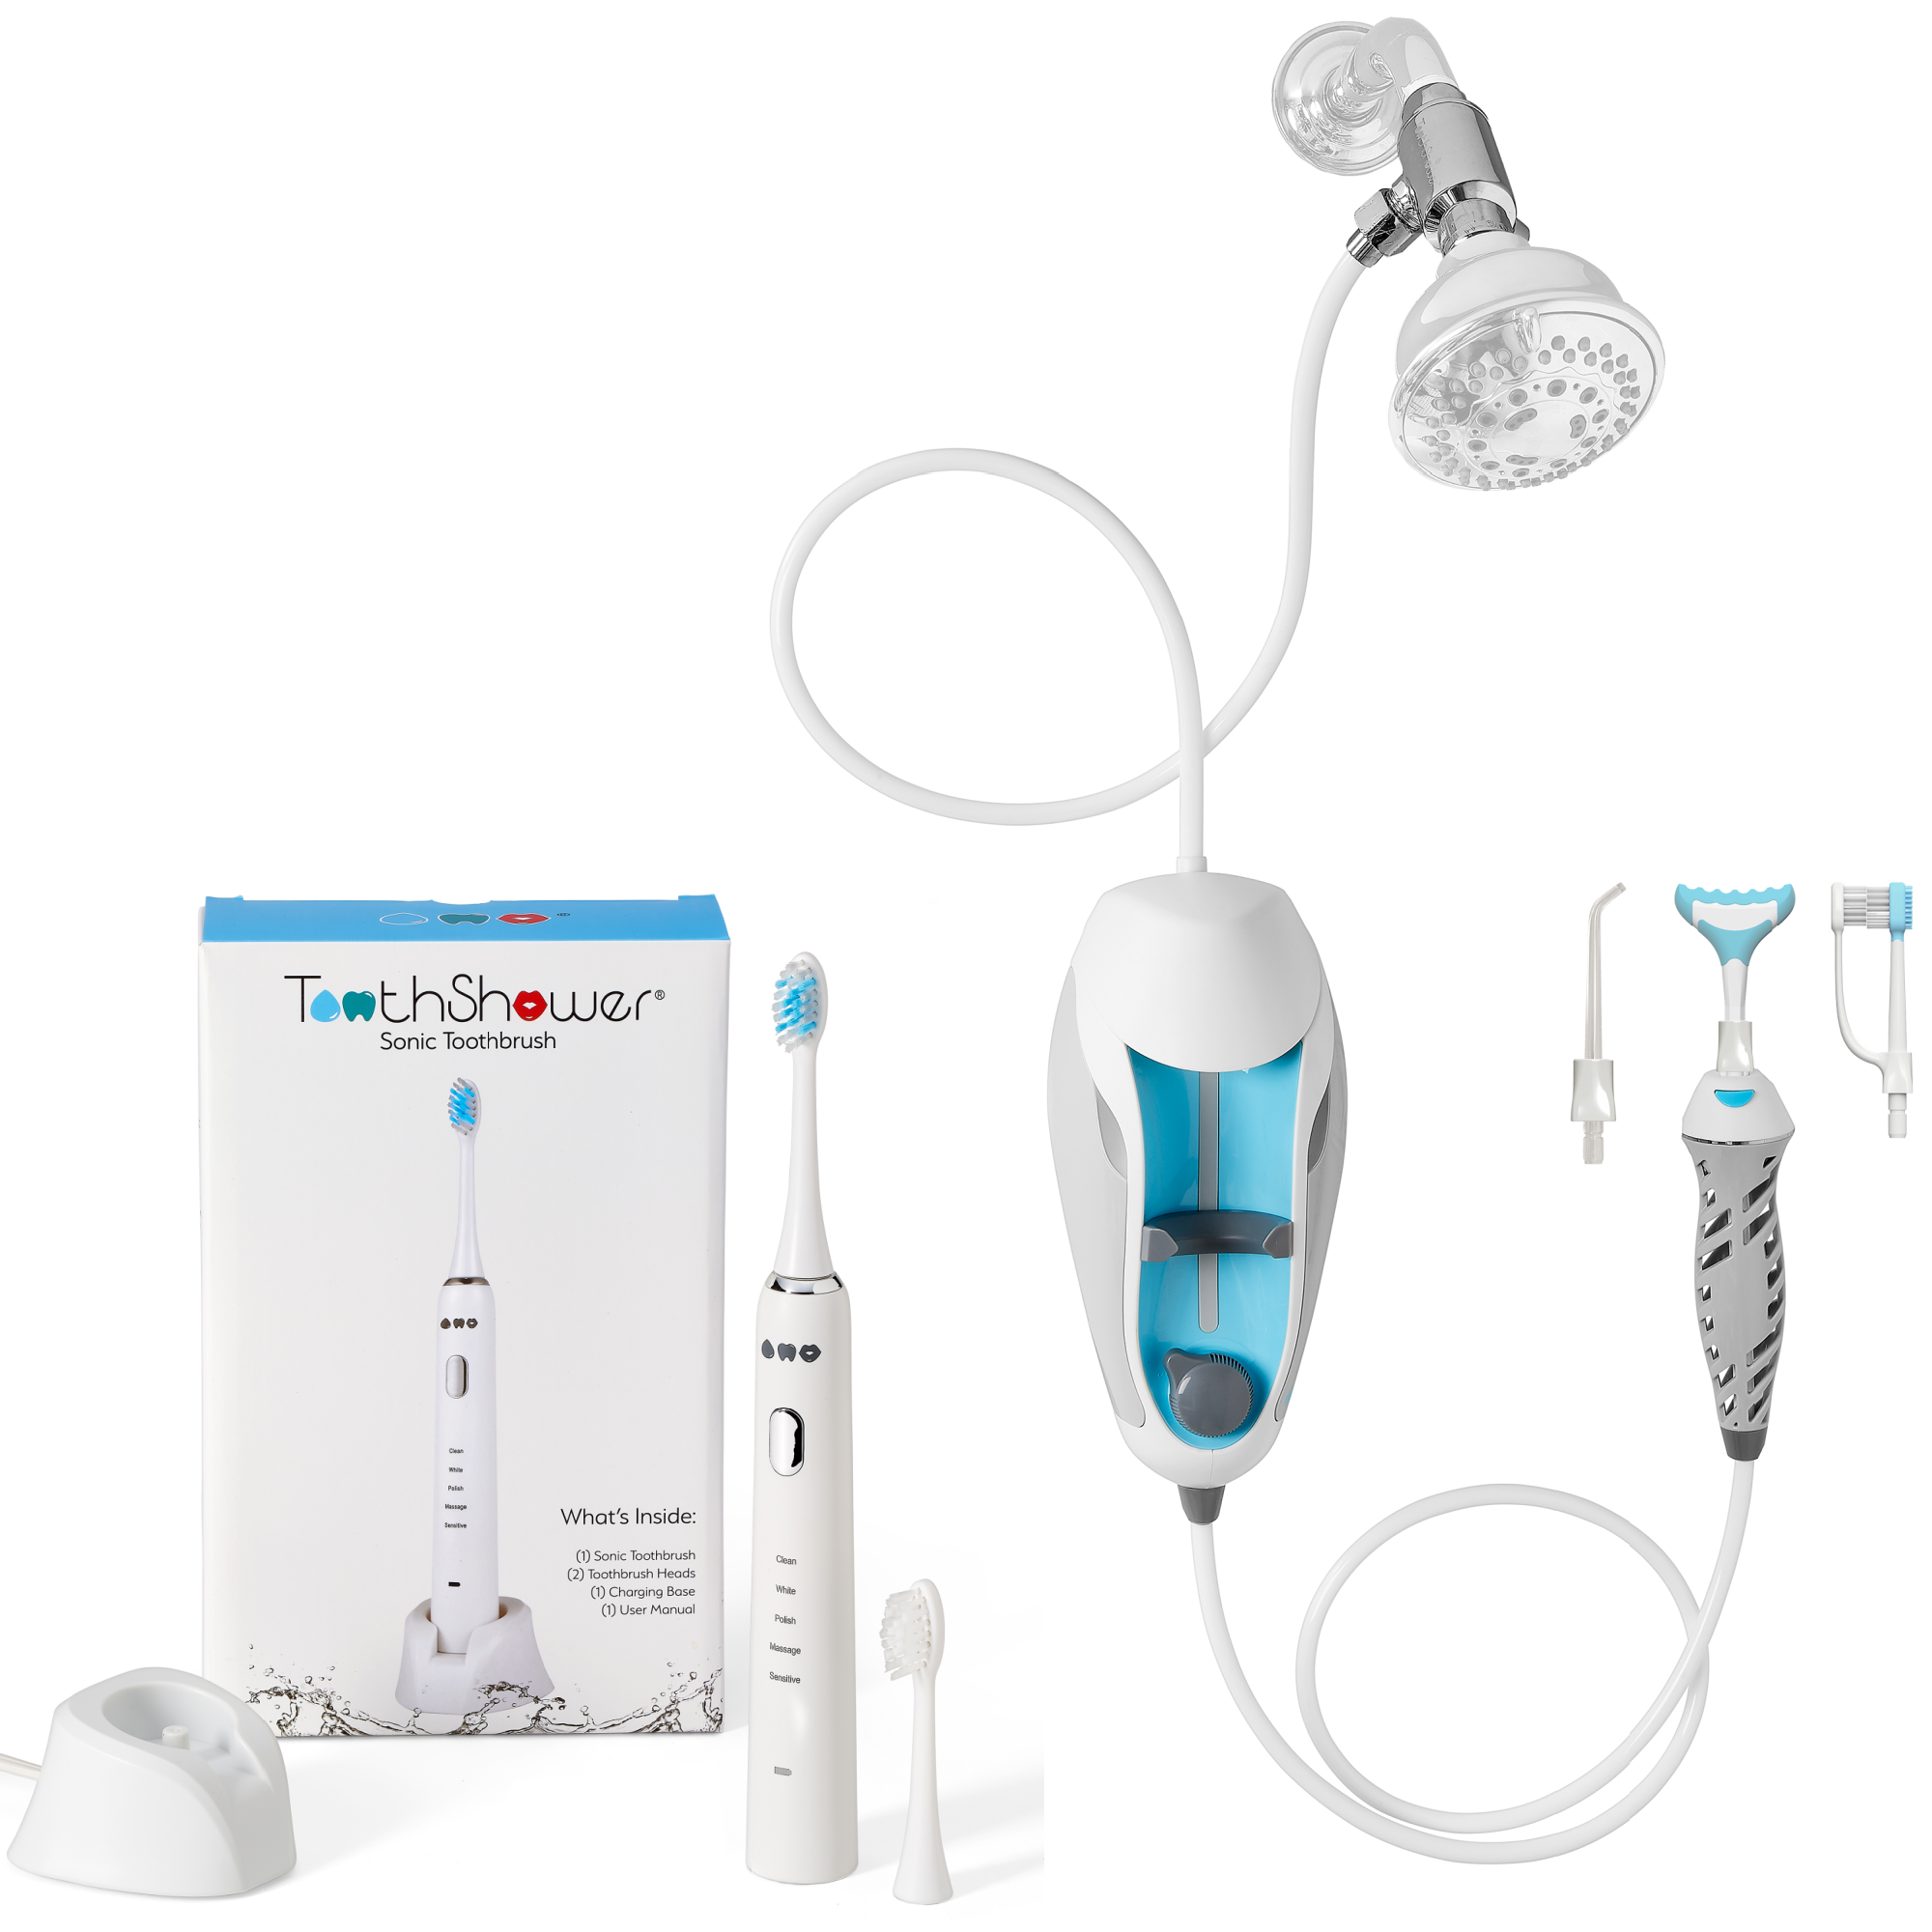 Sold together, sonic toothbrush plus shower flosser, two are better than one